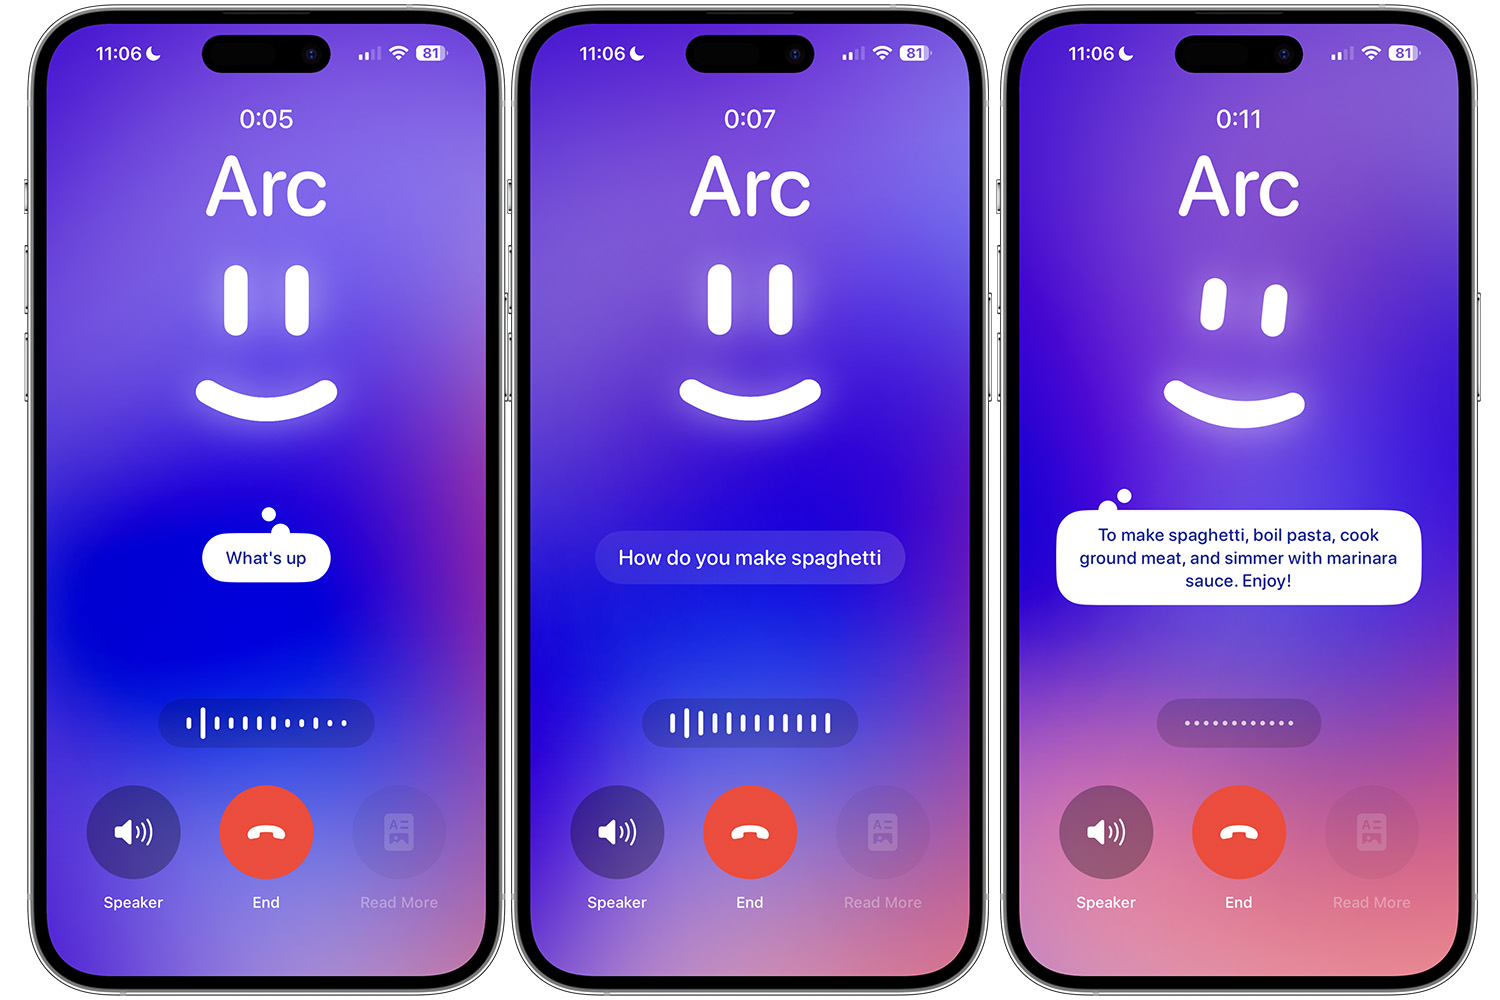 screenshots showing Arc Search's Call Arc on iPhone.